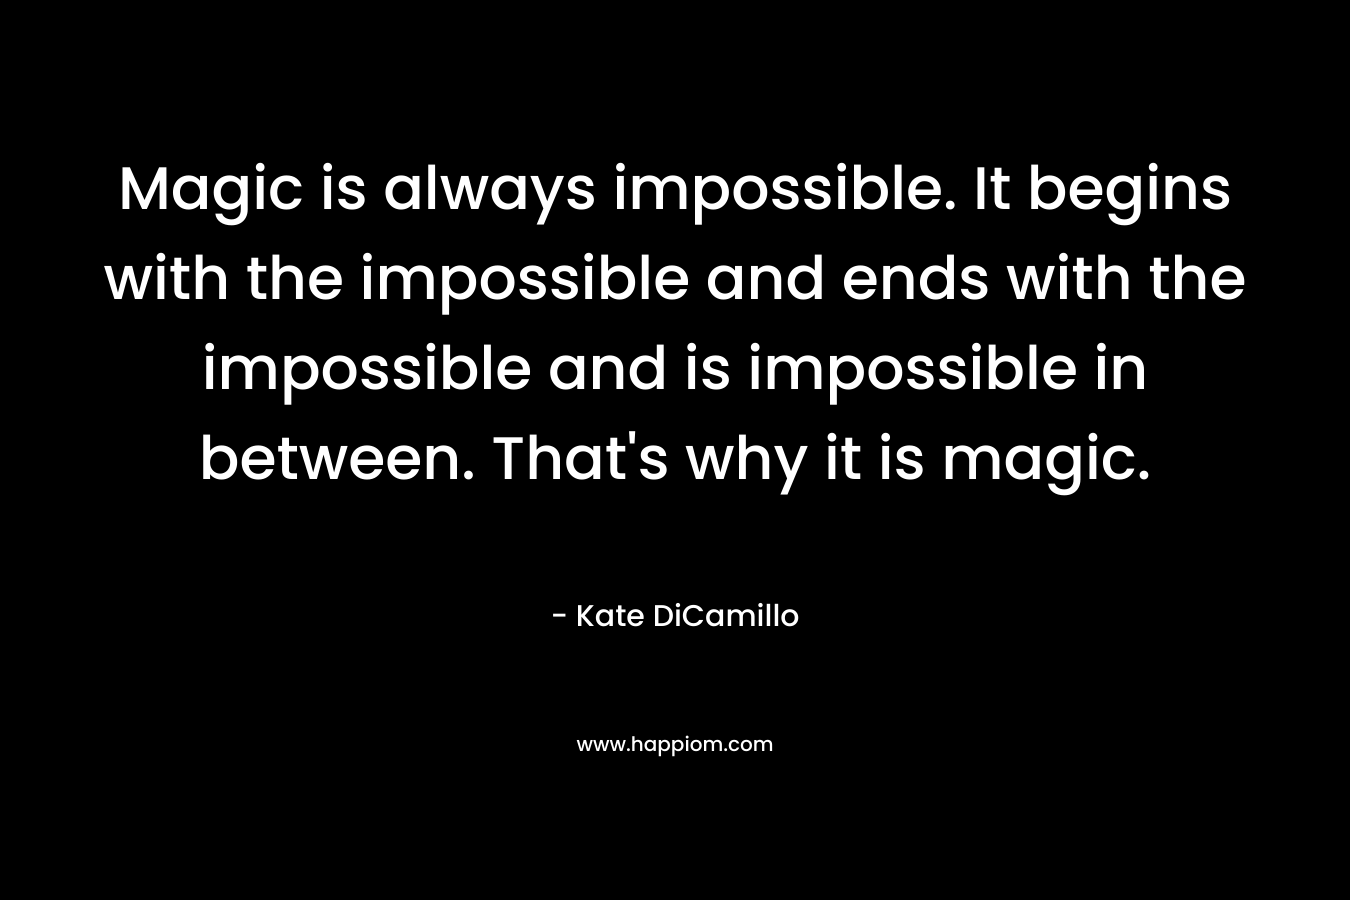 Magic is always impossible. It begins with the impossible and ends with the impossible and is impossible in between. That's why it is magic.